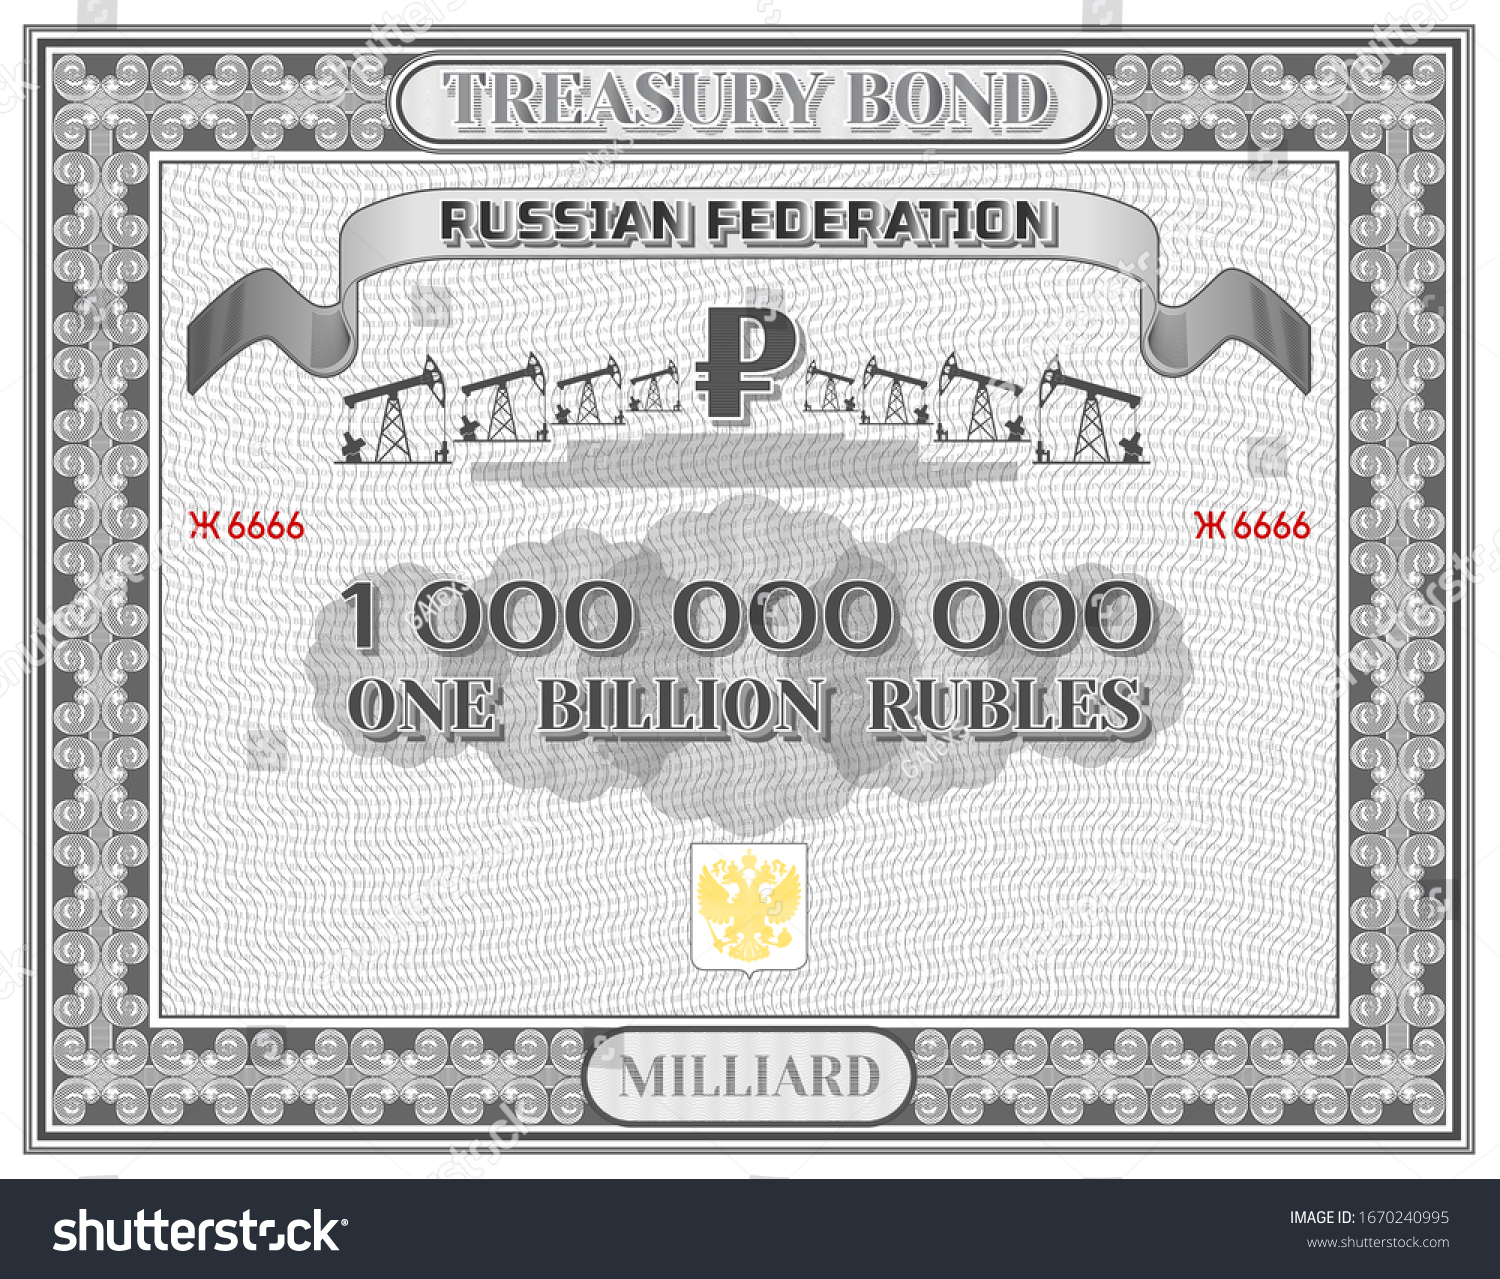 SVG of Treasury bonds of the Russian Federation in a gray frame with the inscription billion rubles and oil pumps svg